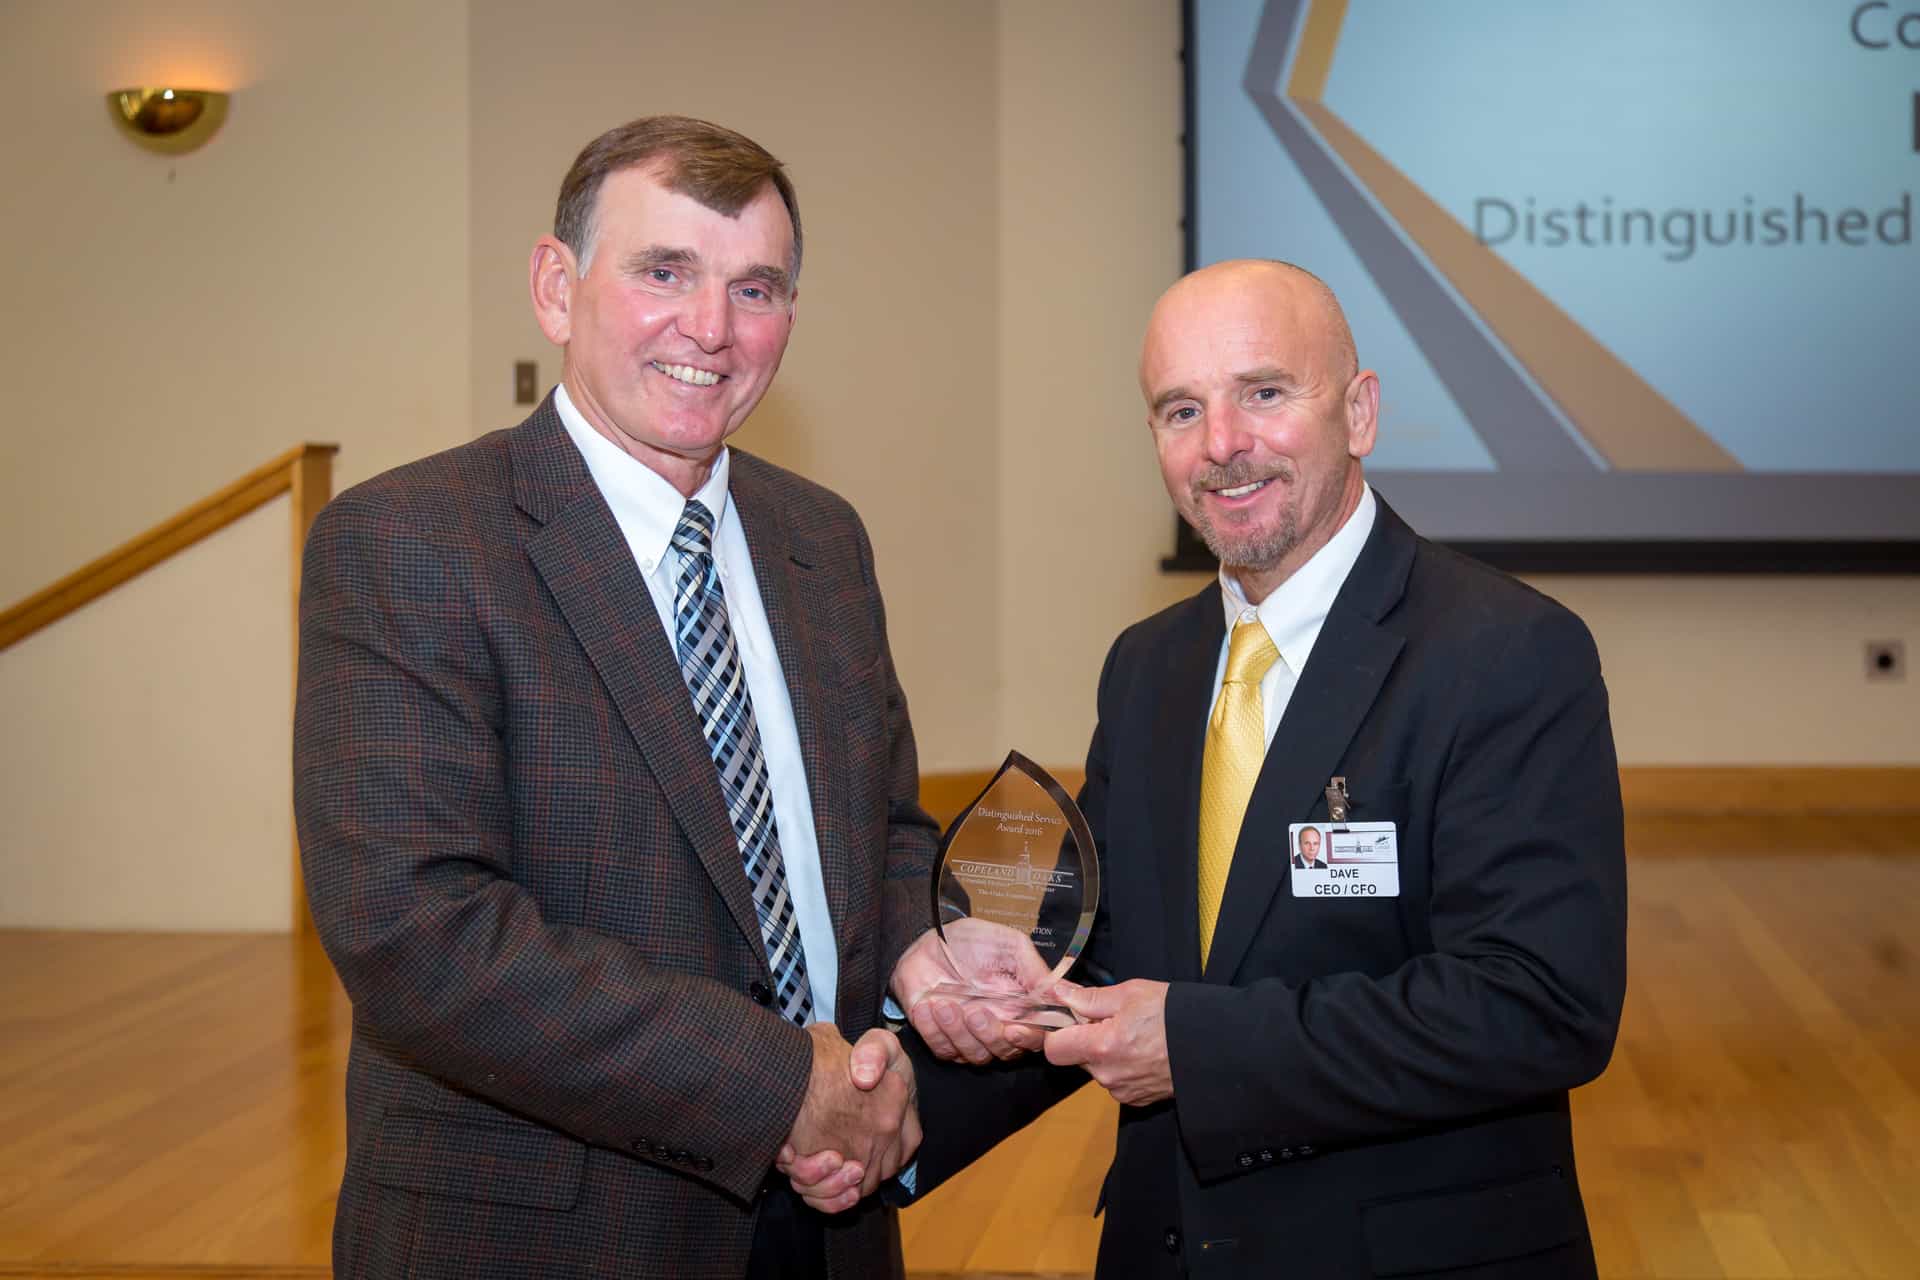 Rusty Kiko receives Distinguished Service Award from Dave Mannion